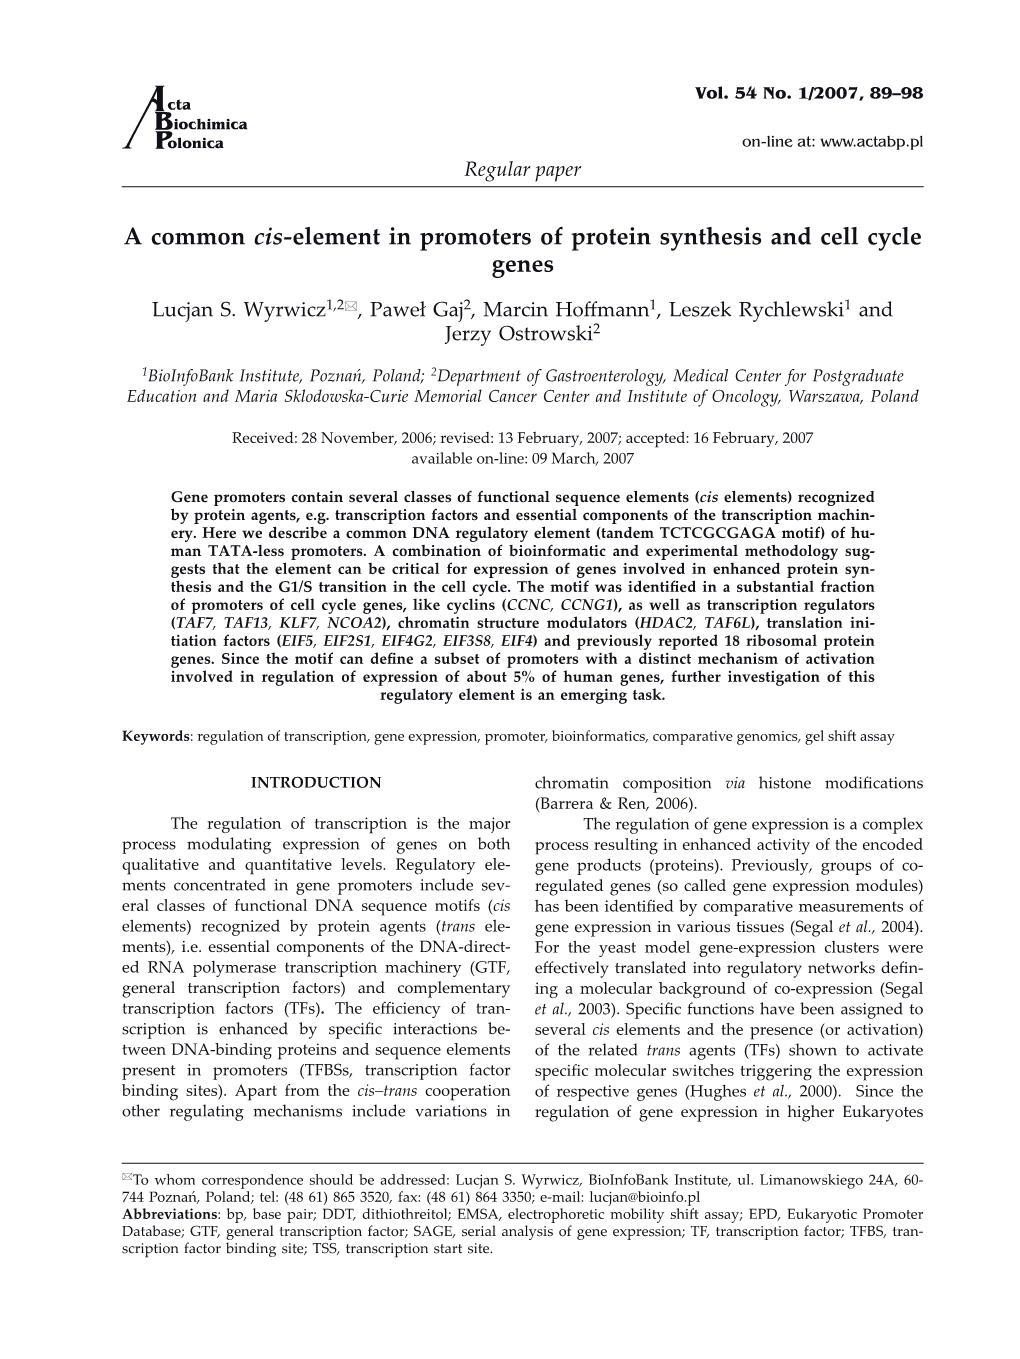 A Common Cis-Element in Promoters of Protein Synthesis and Cell Cycle Genes